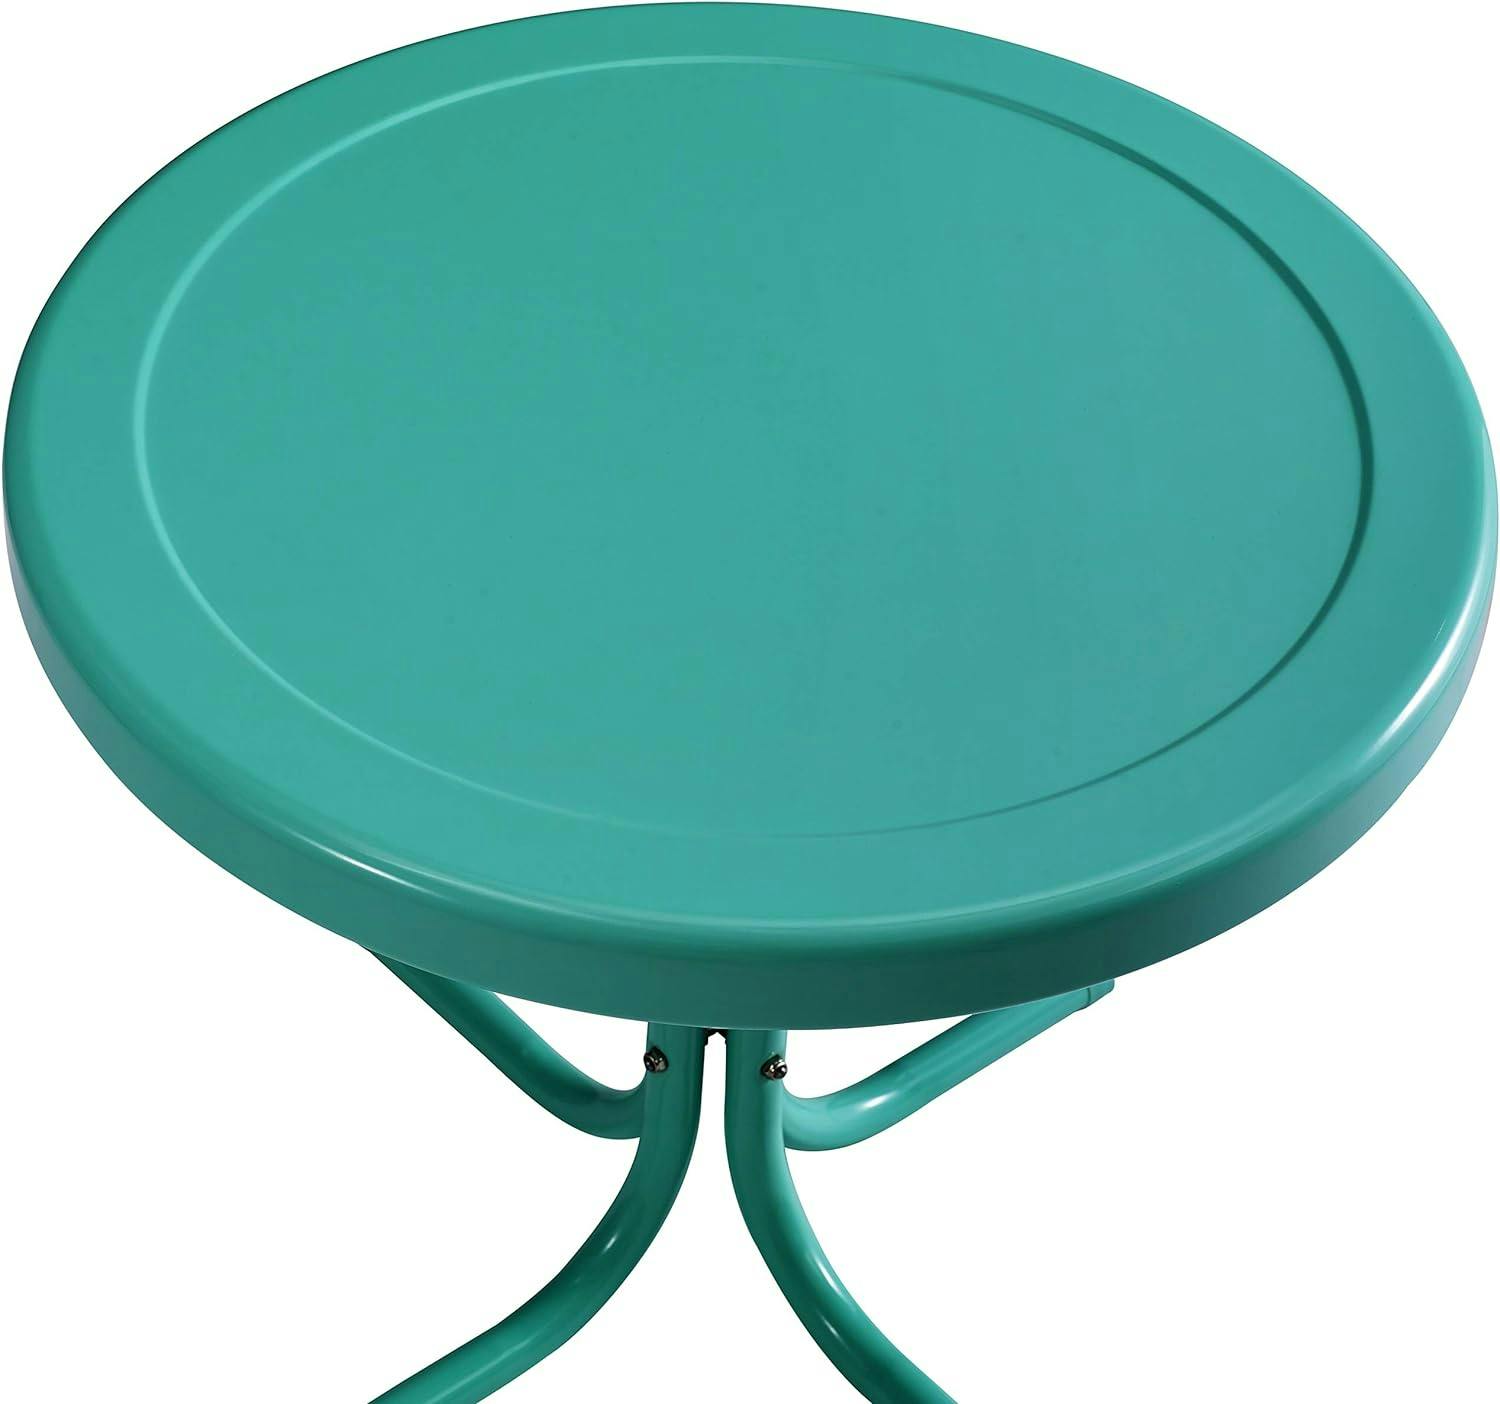 Retro Griffith Turquoise Steel Outdoor Side Table